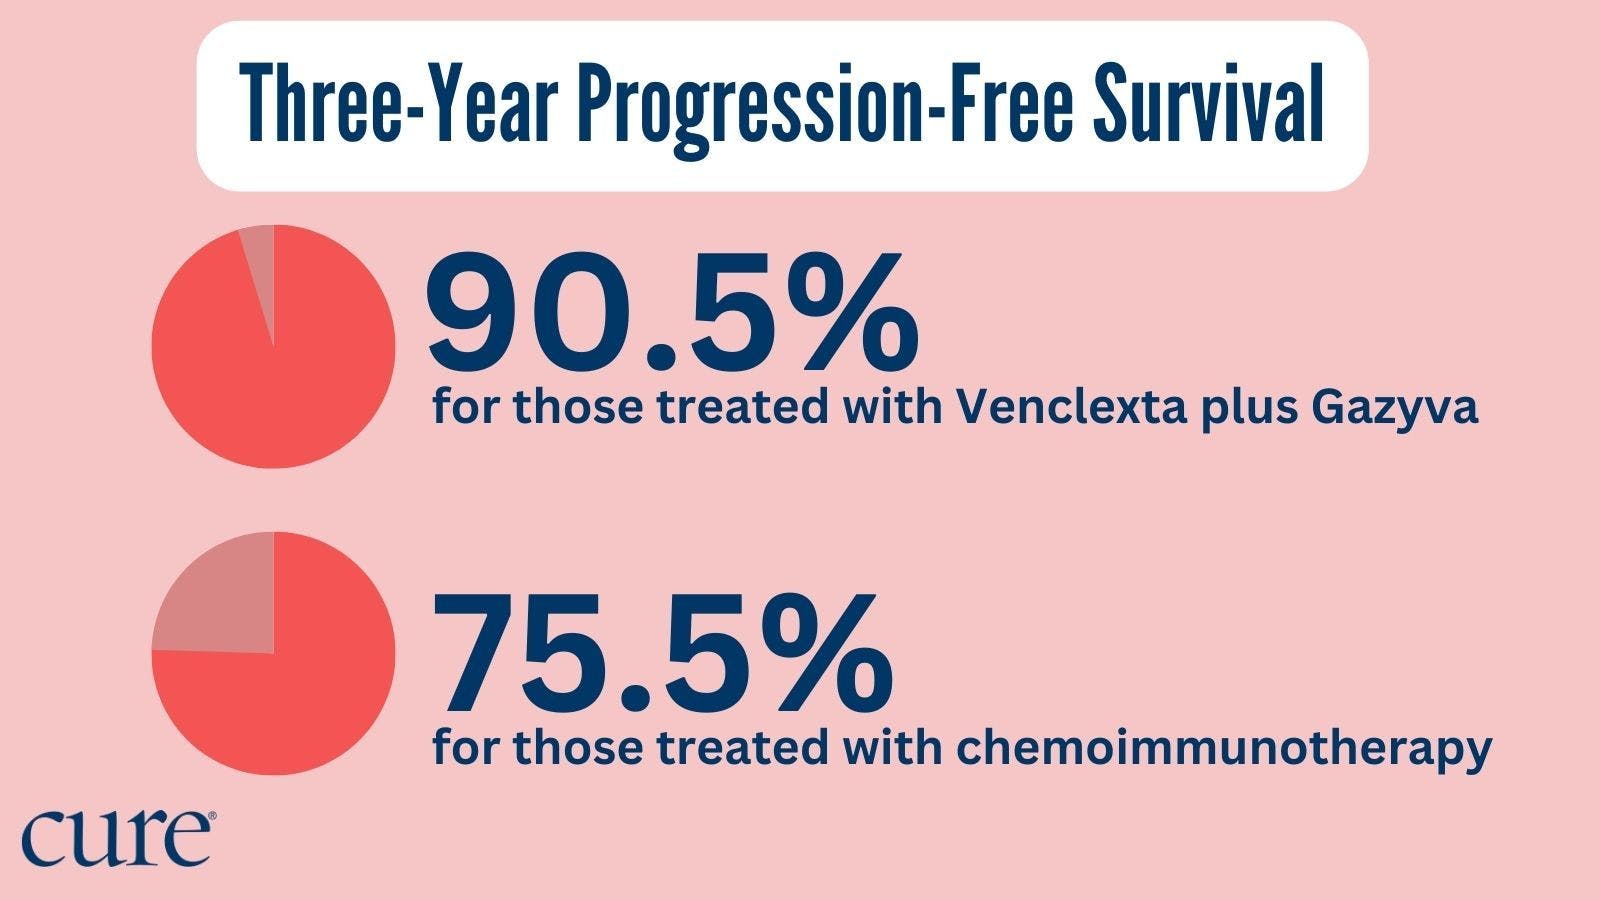 Three-year progression-free survival in patients treated with Venclexta plus Gazyva was 90.5% compared with 75.5% in those treated with chemoimmunotherapy.